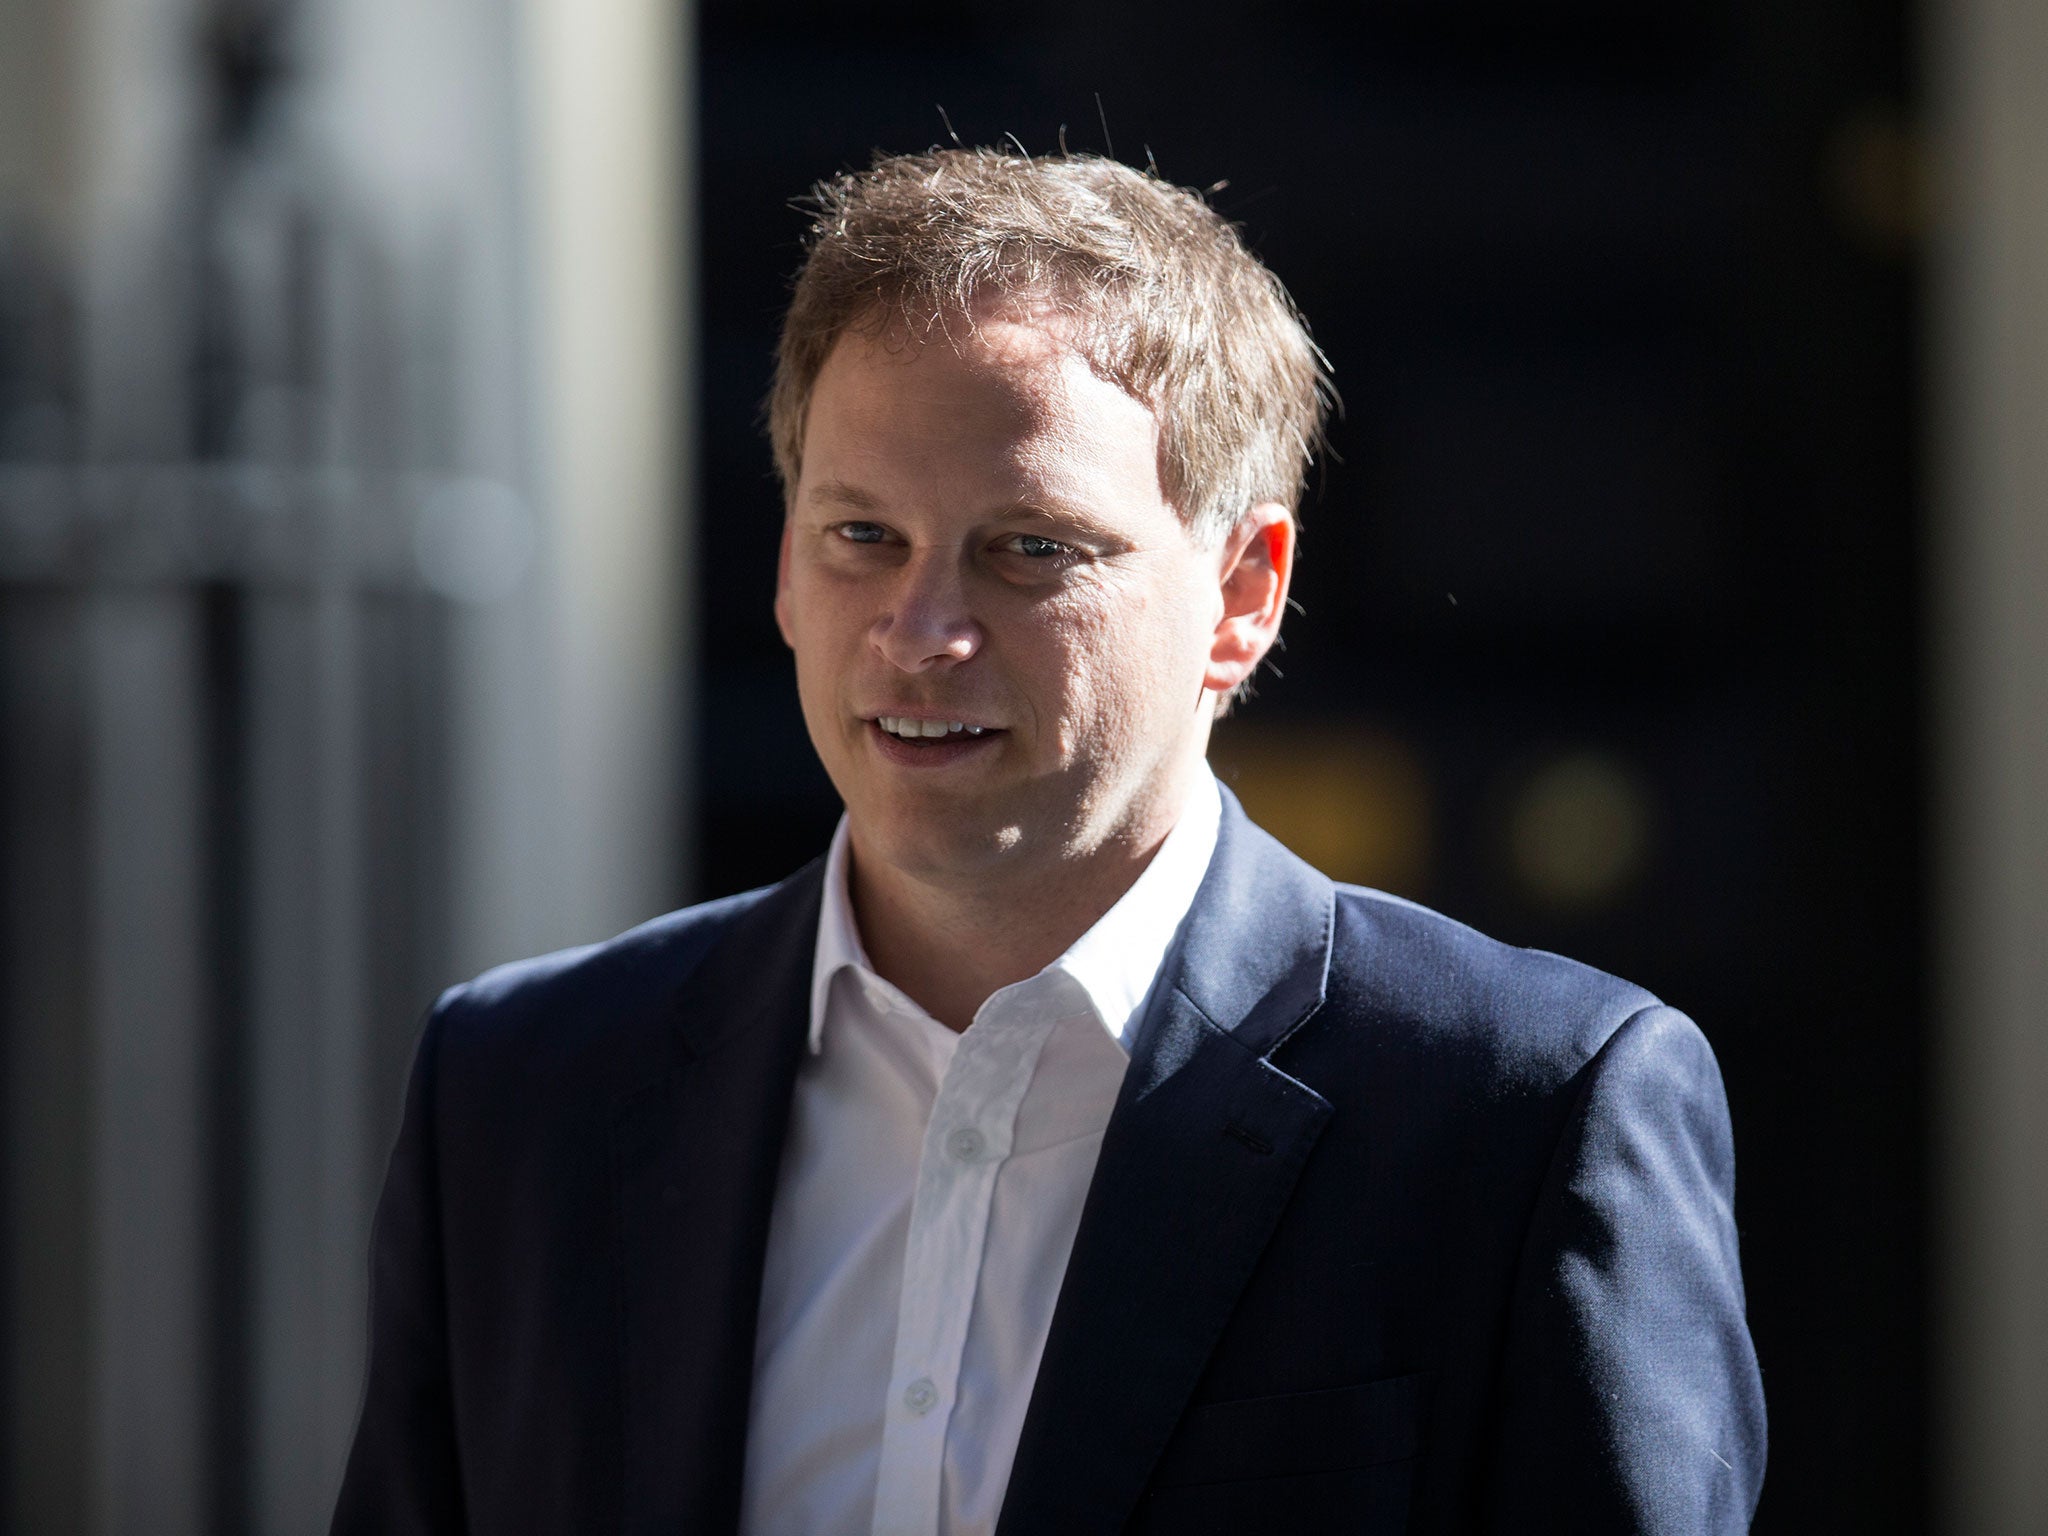 Conservative Party chairman, Grant Shapps has indicated that David Cameron is inching towards taking part in proposed live television debates in the run-up to the general election